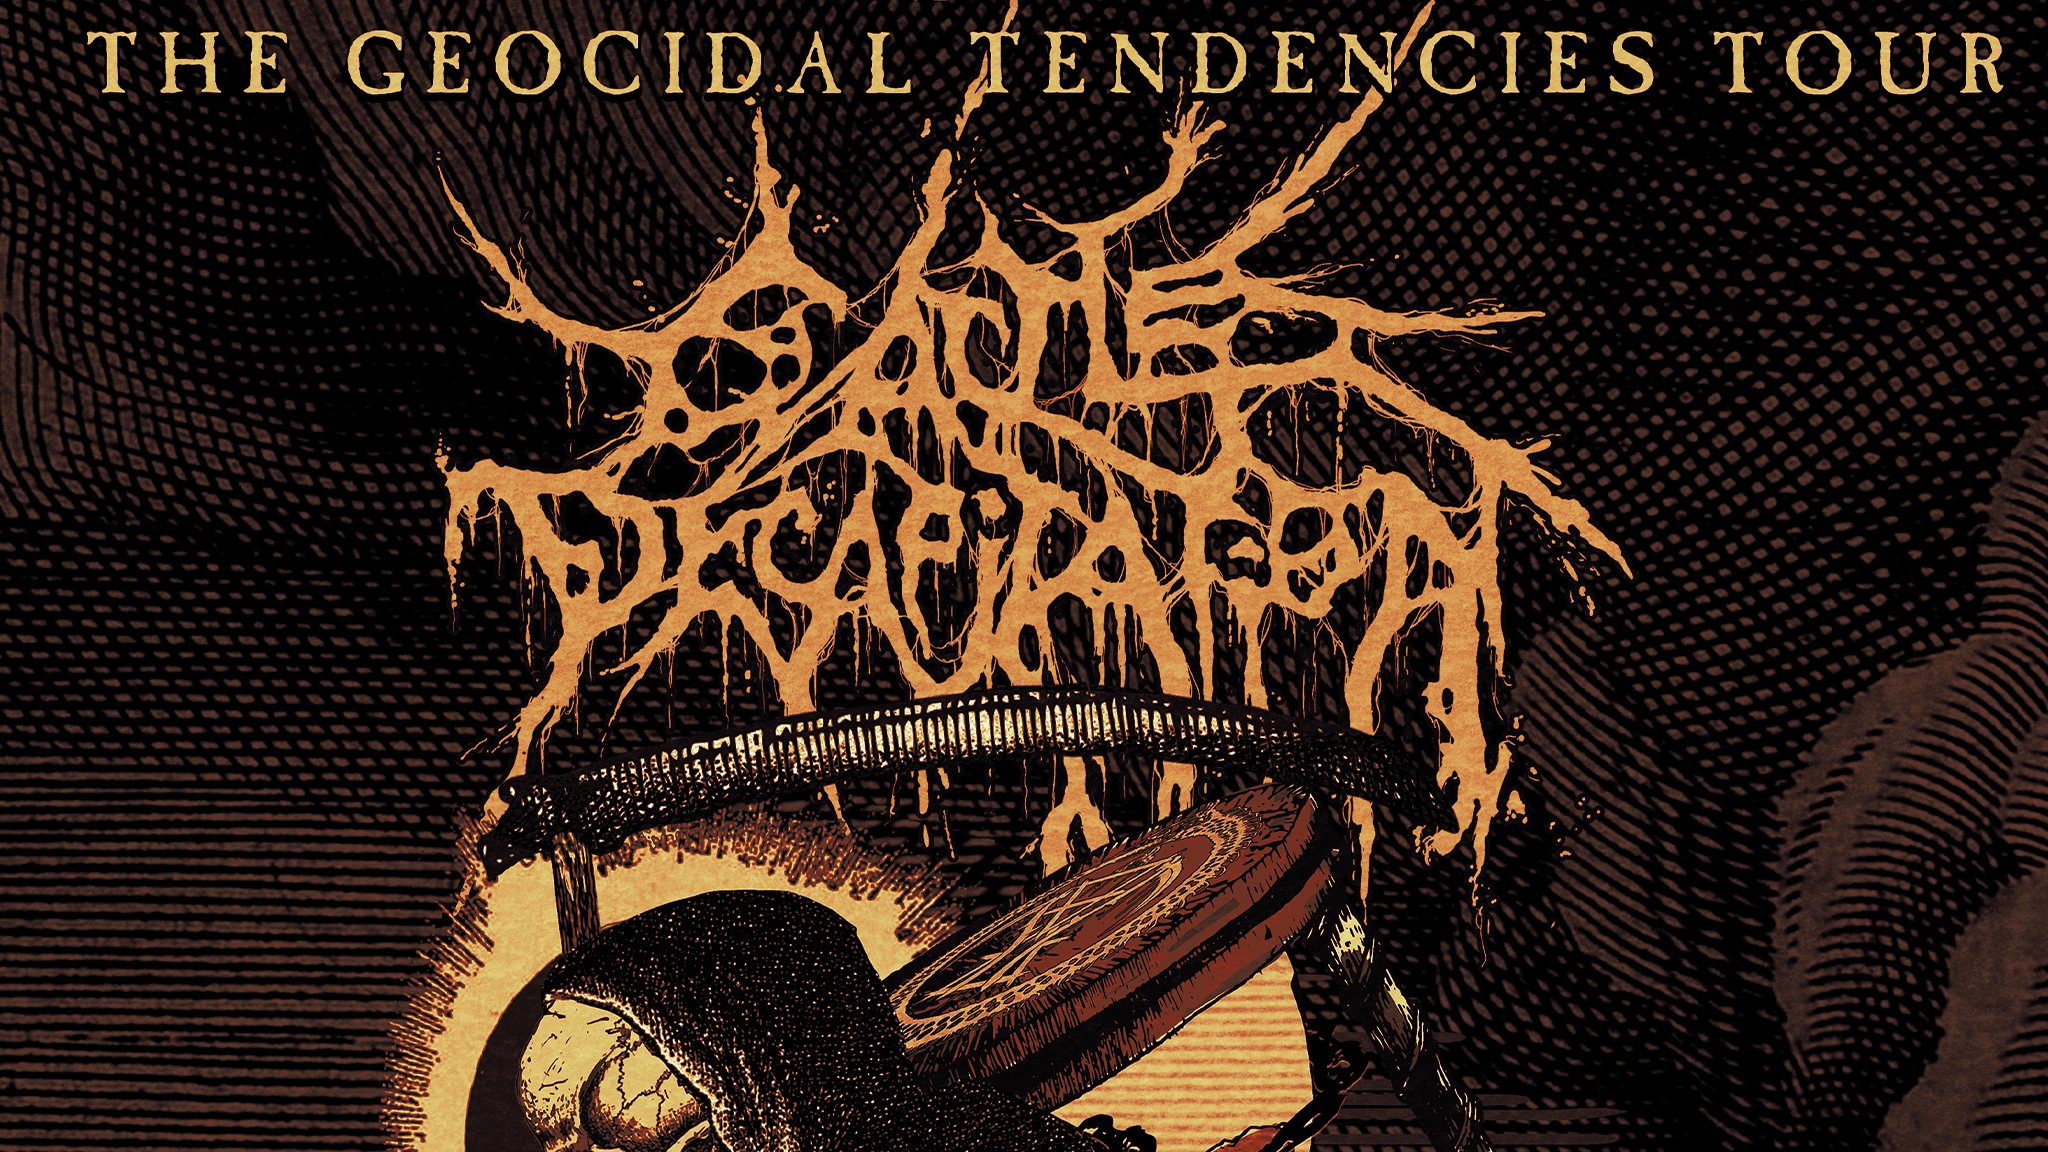 Cattle Decapitation Wallpapers